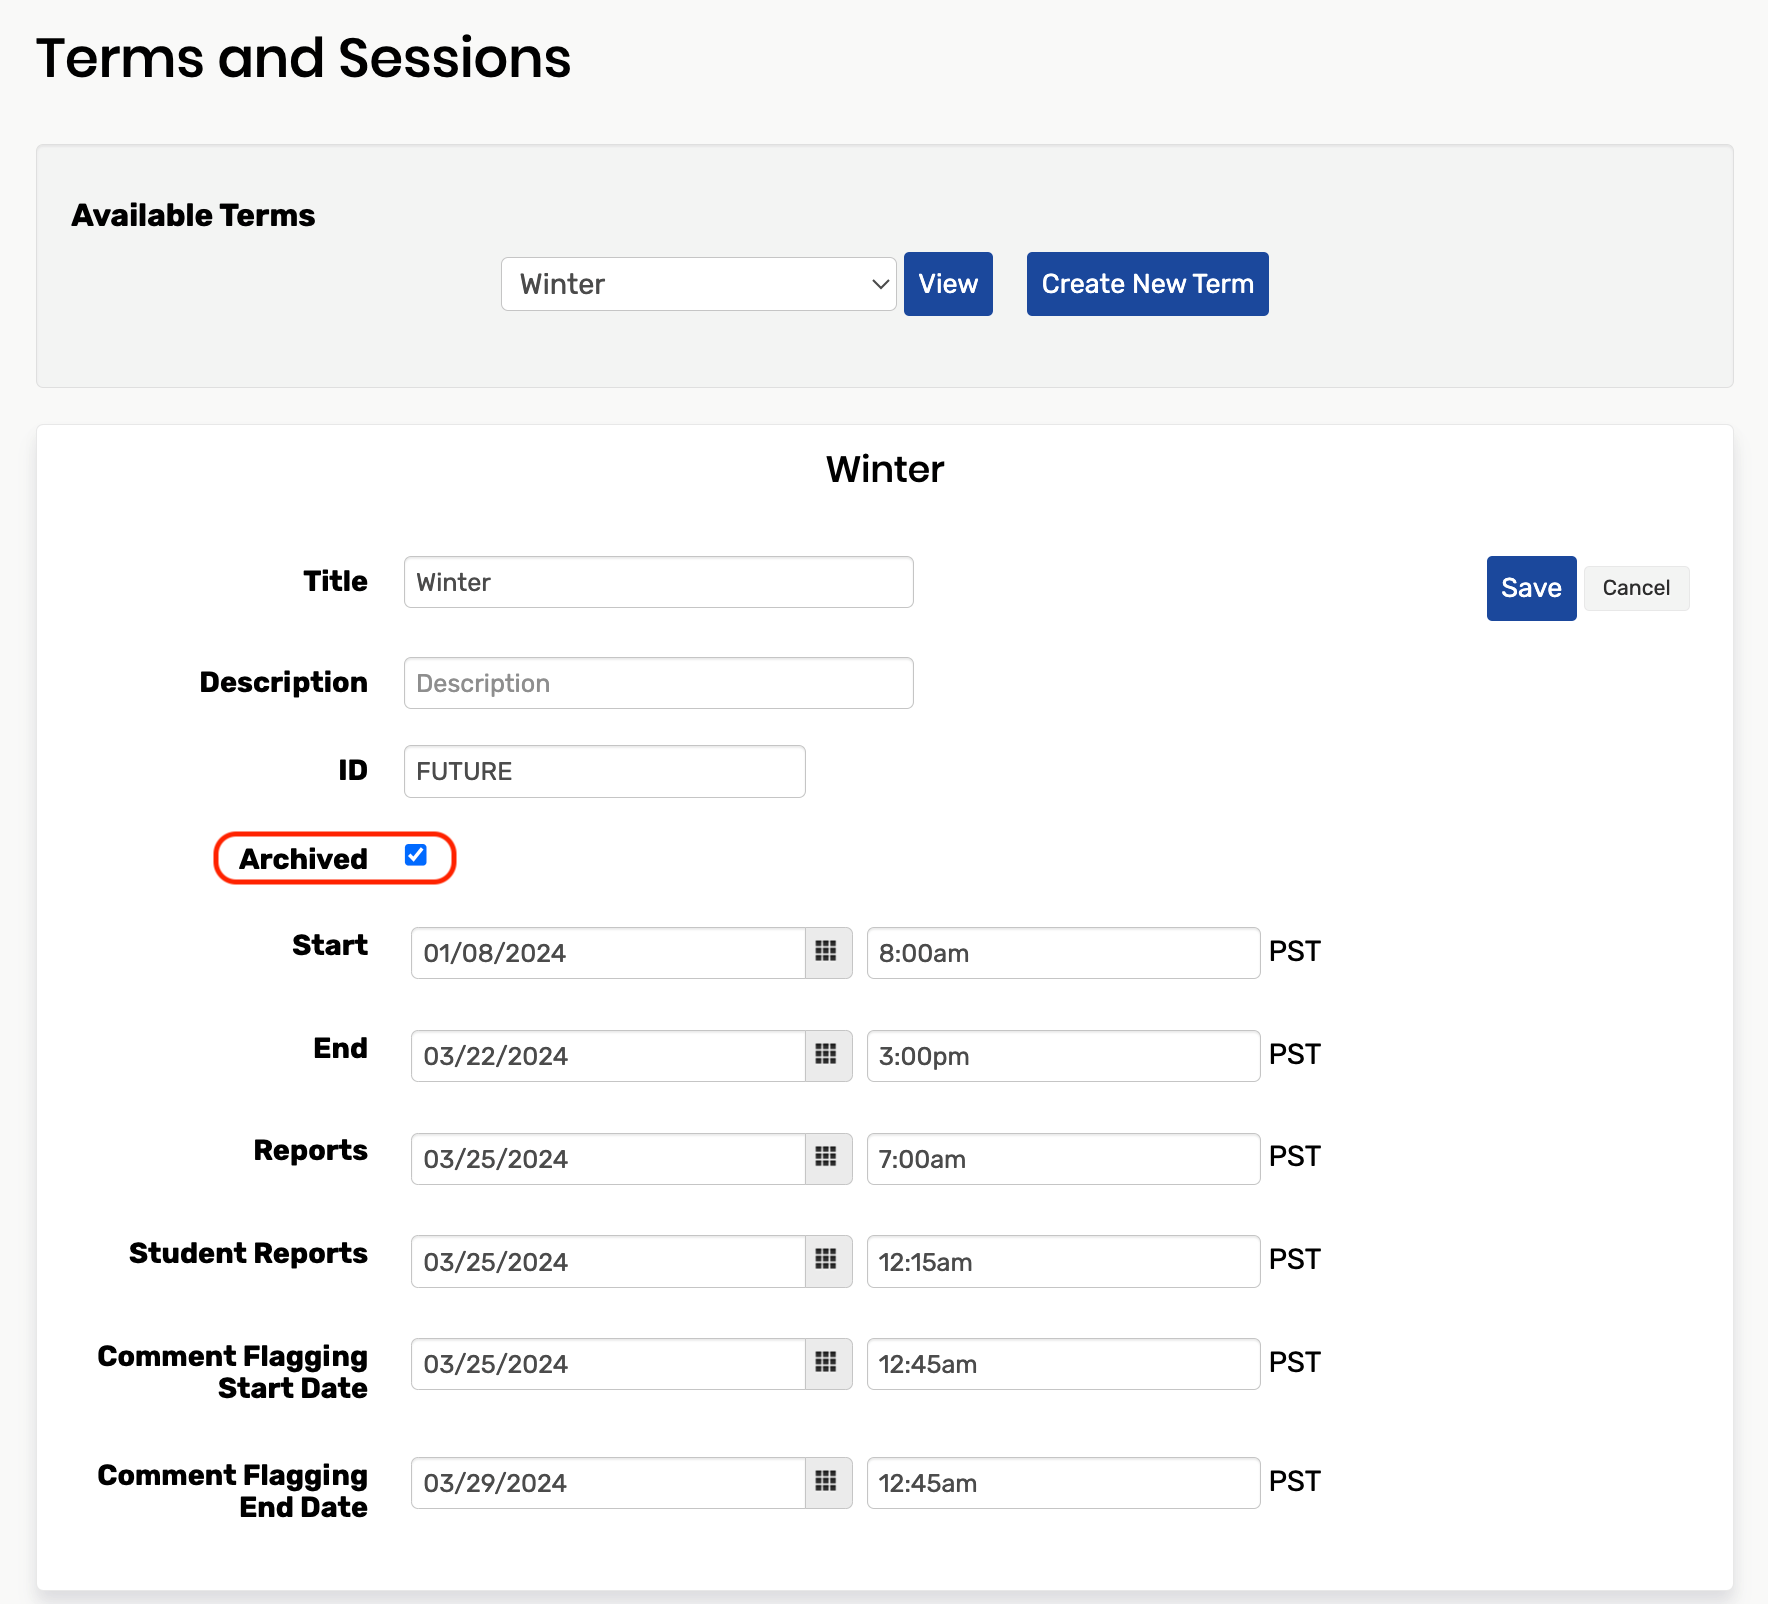 The archived checkbox on the terms and sessions page